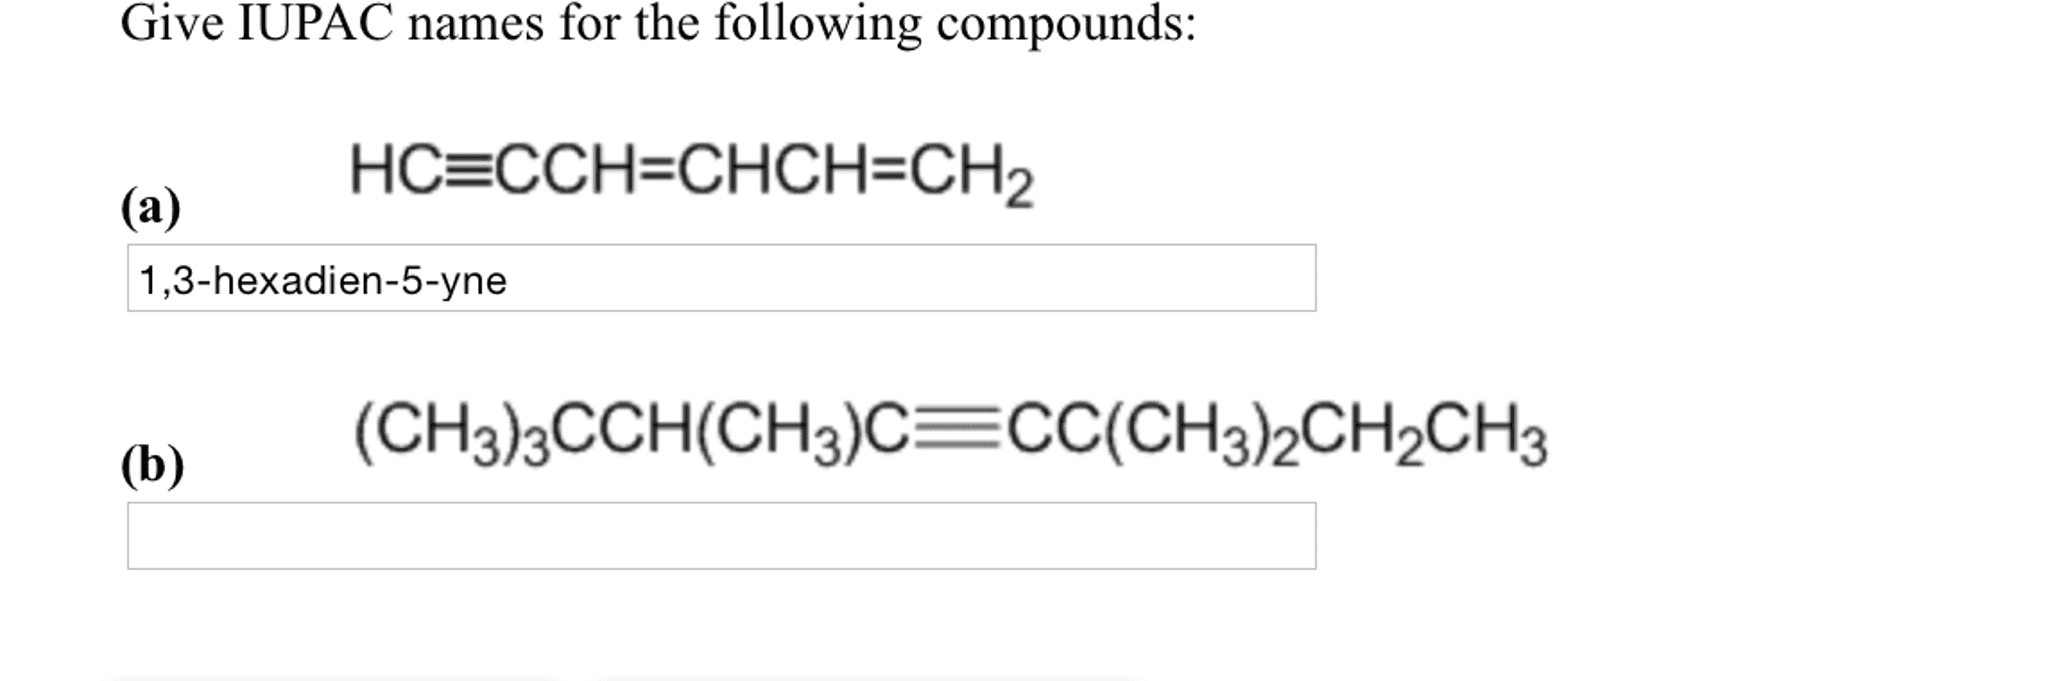 Oneclass Give Iupac Names For The Following Compounds I Just Need Part